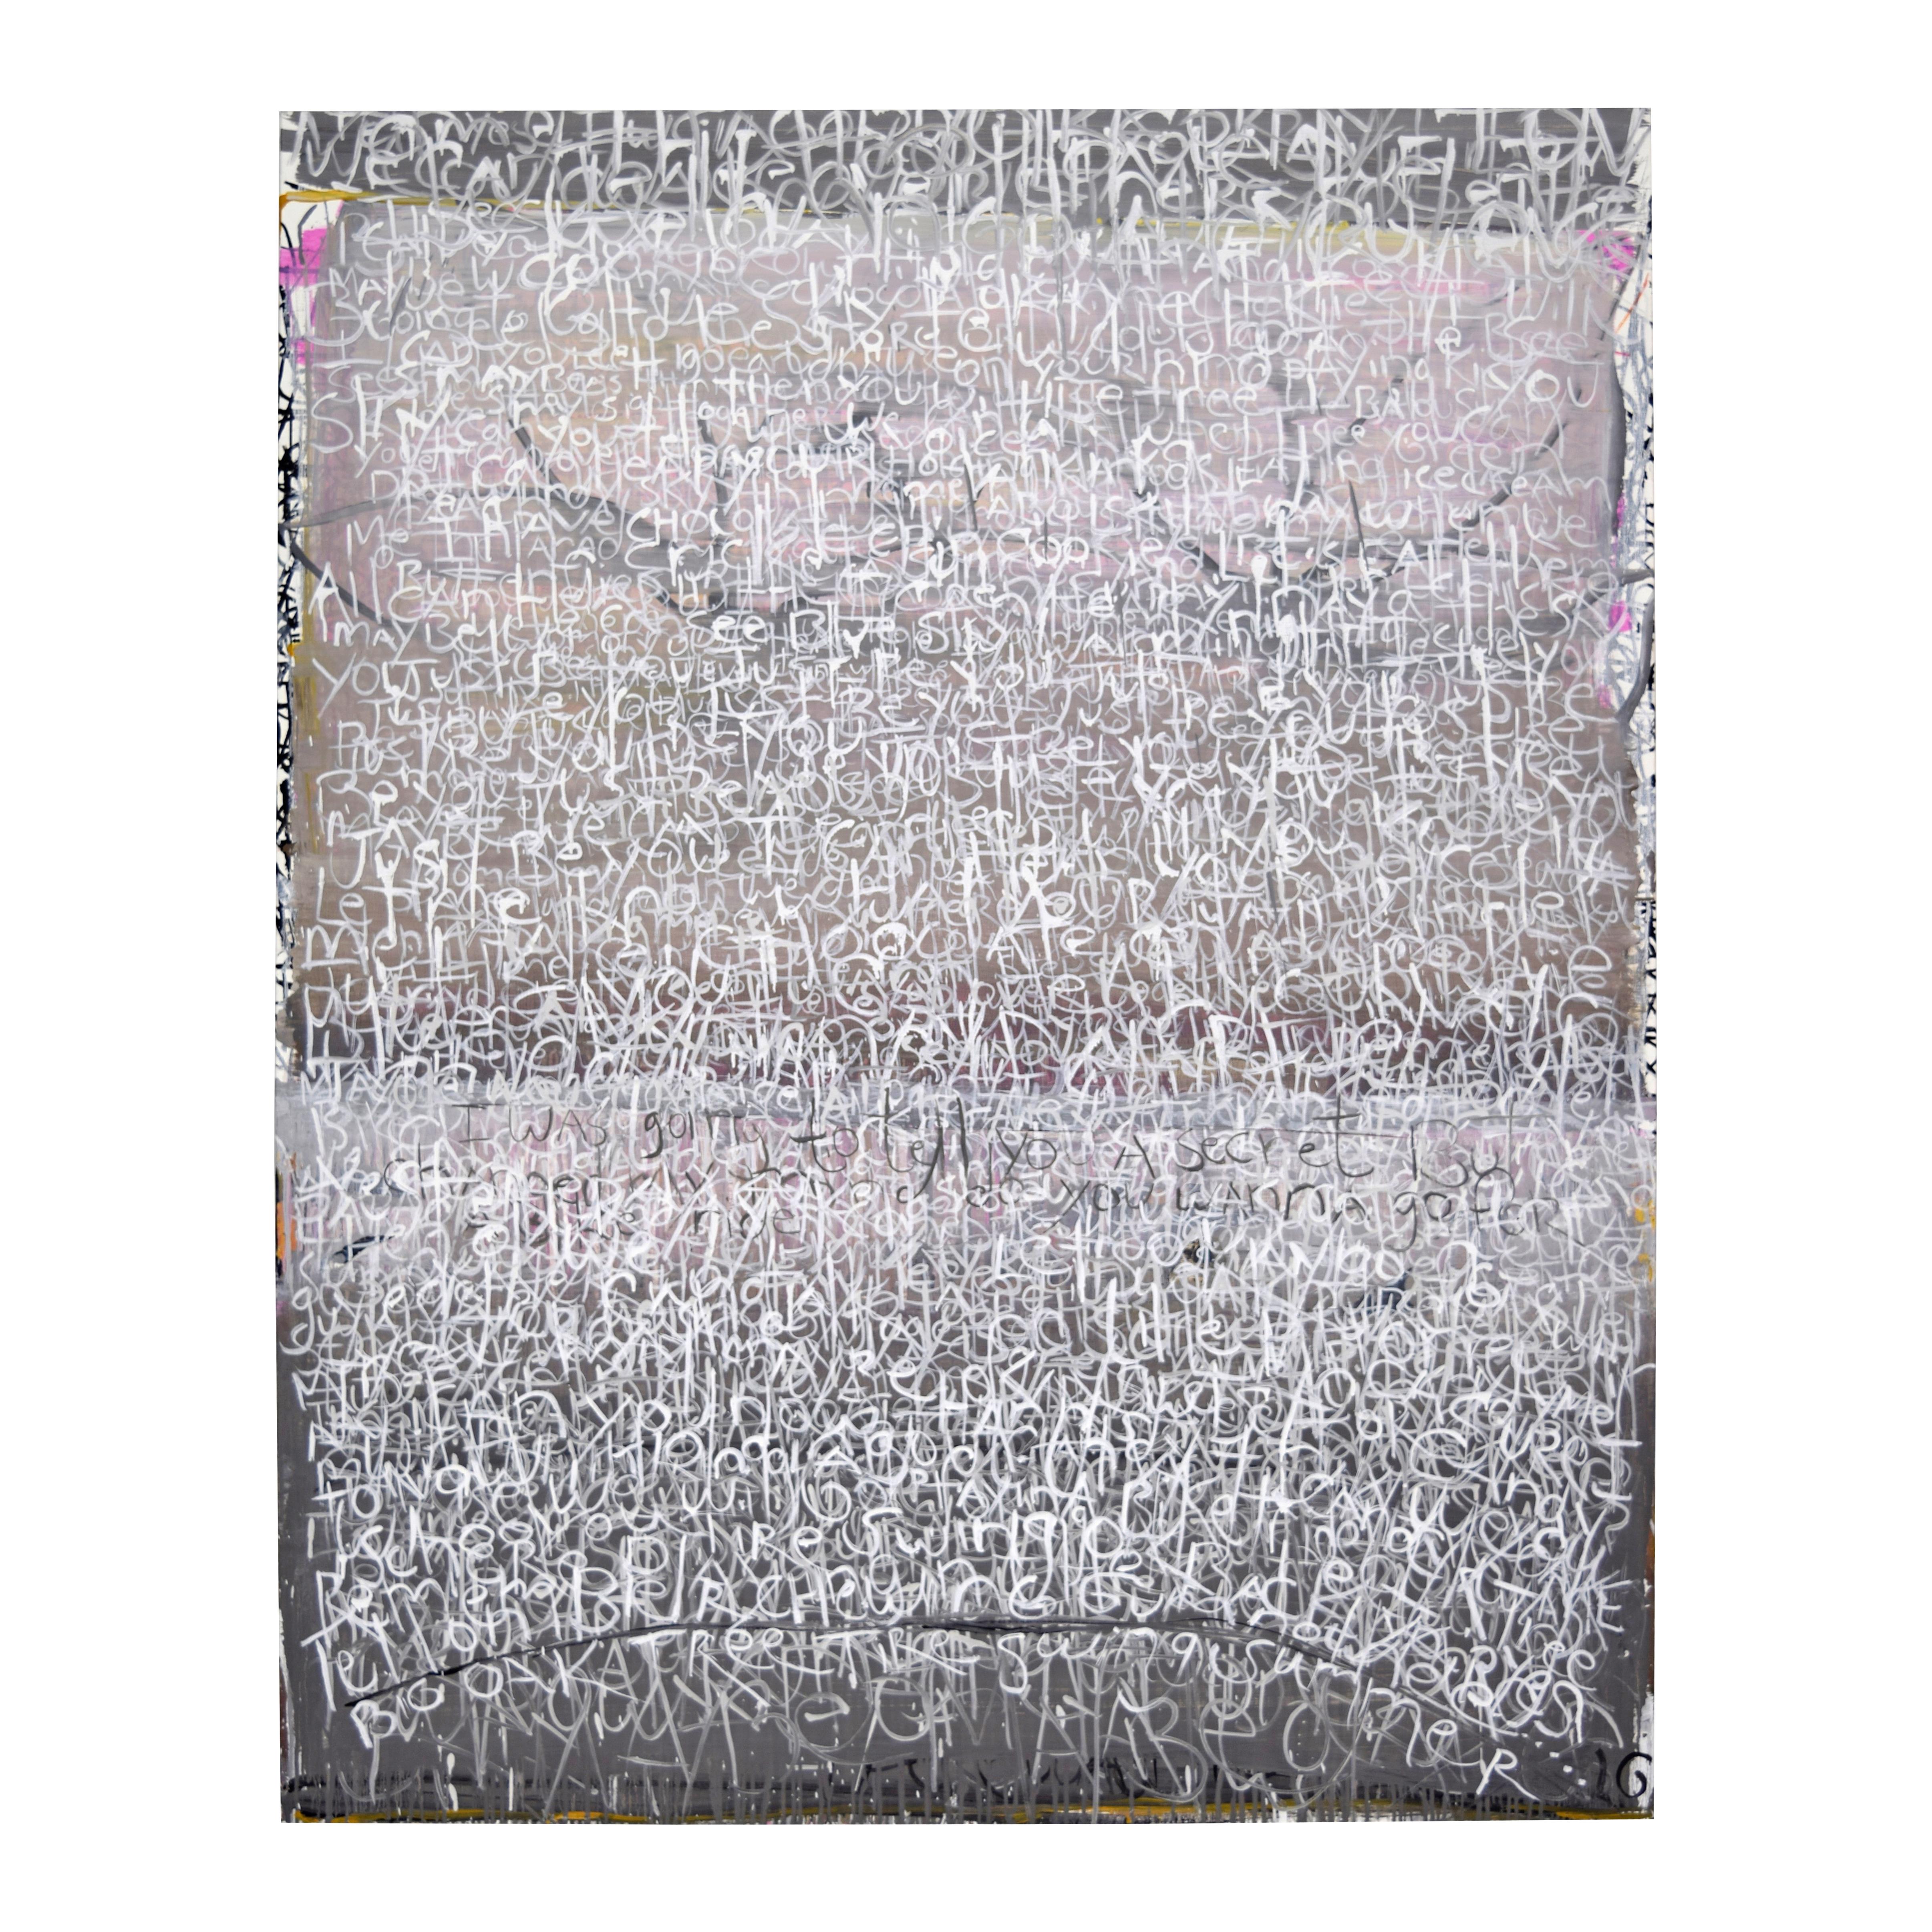 Anastasia Faiella Abstract Painting - Memories in White on Gray & Lavender